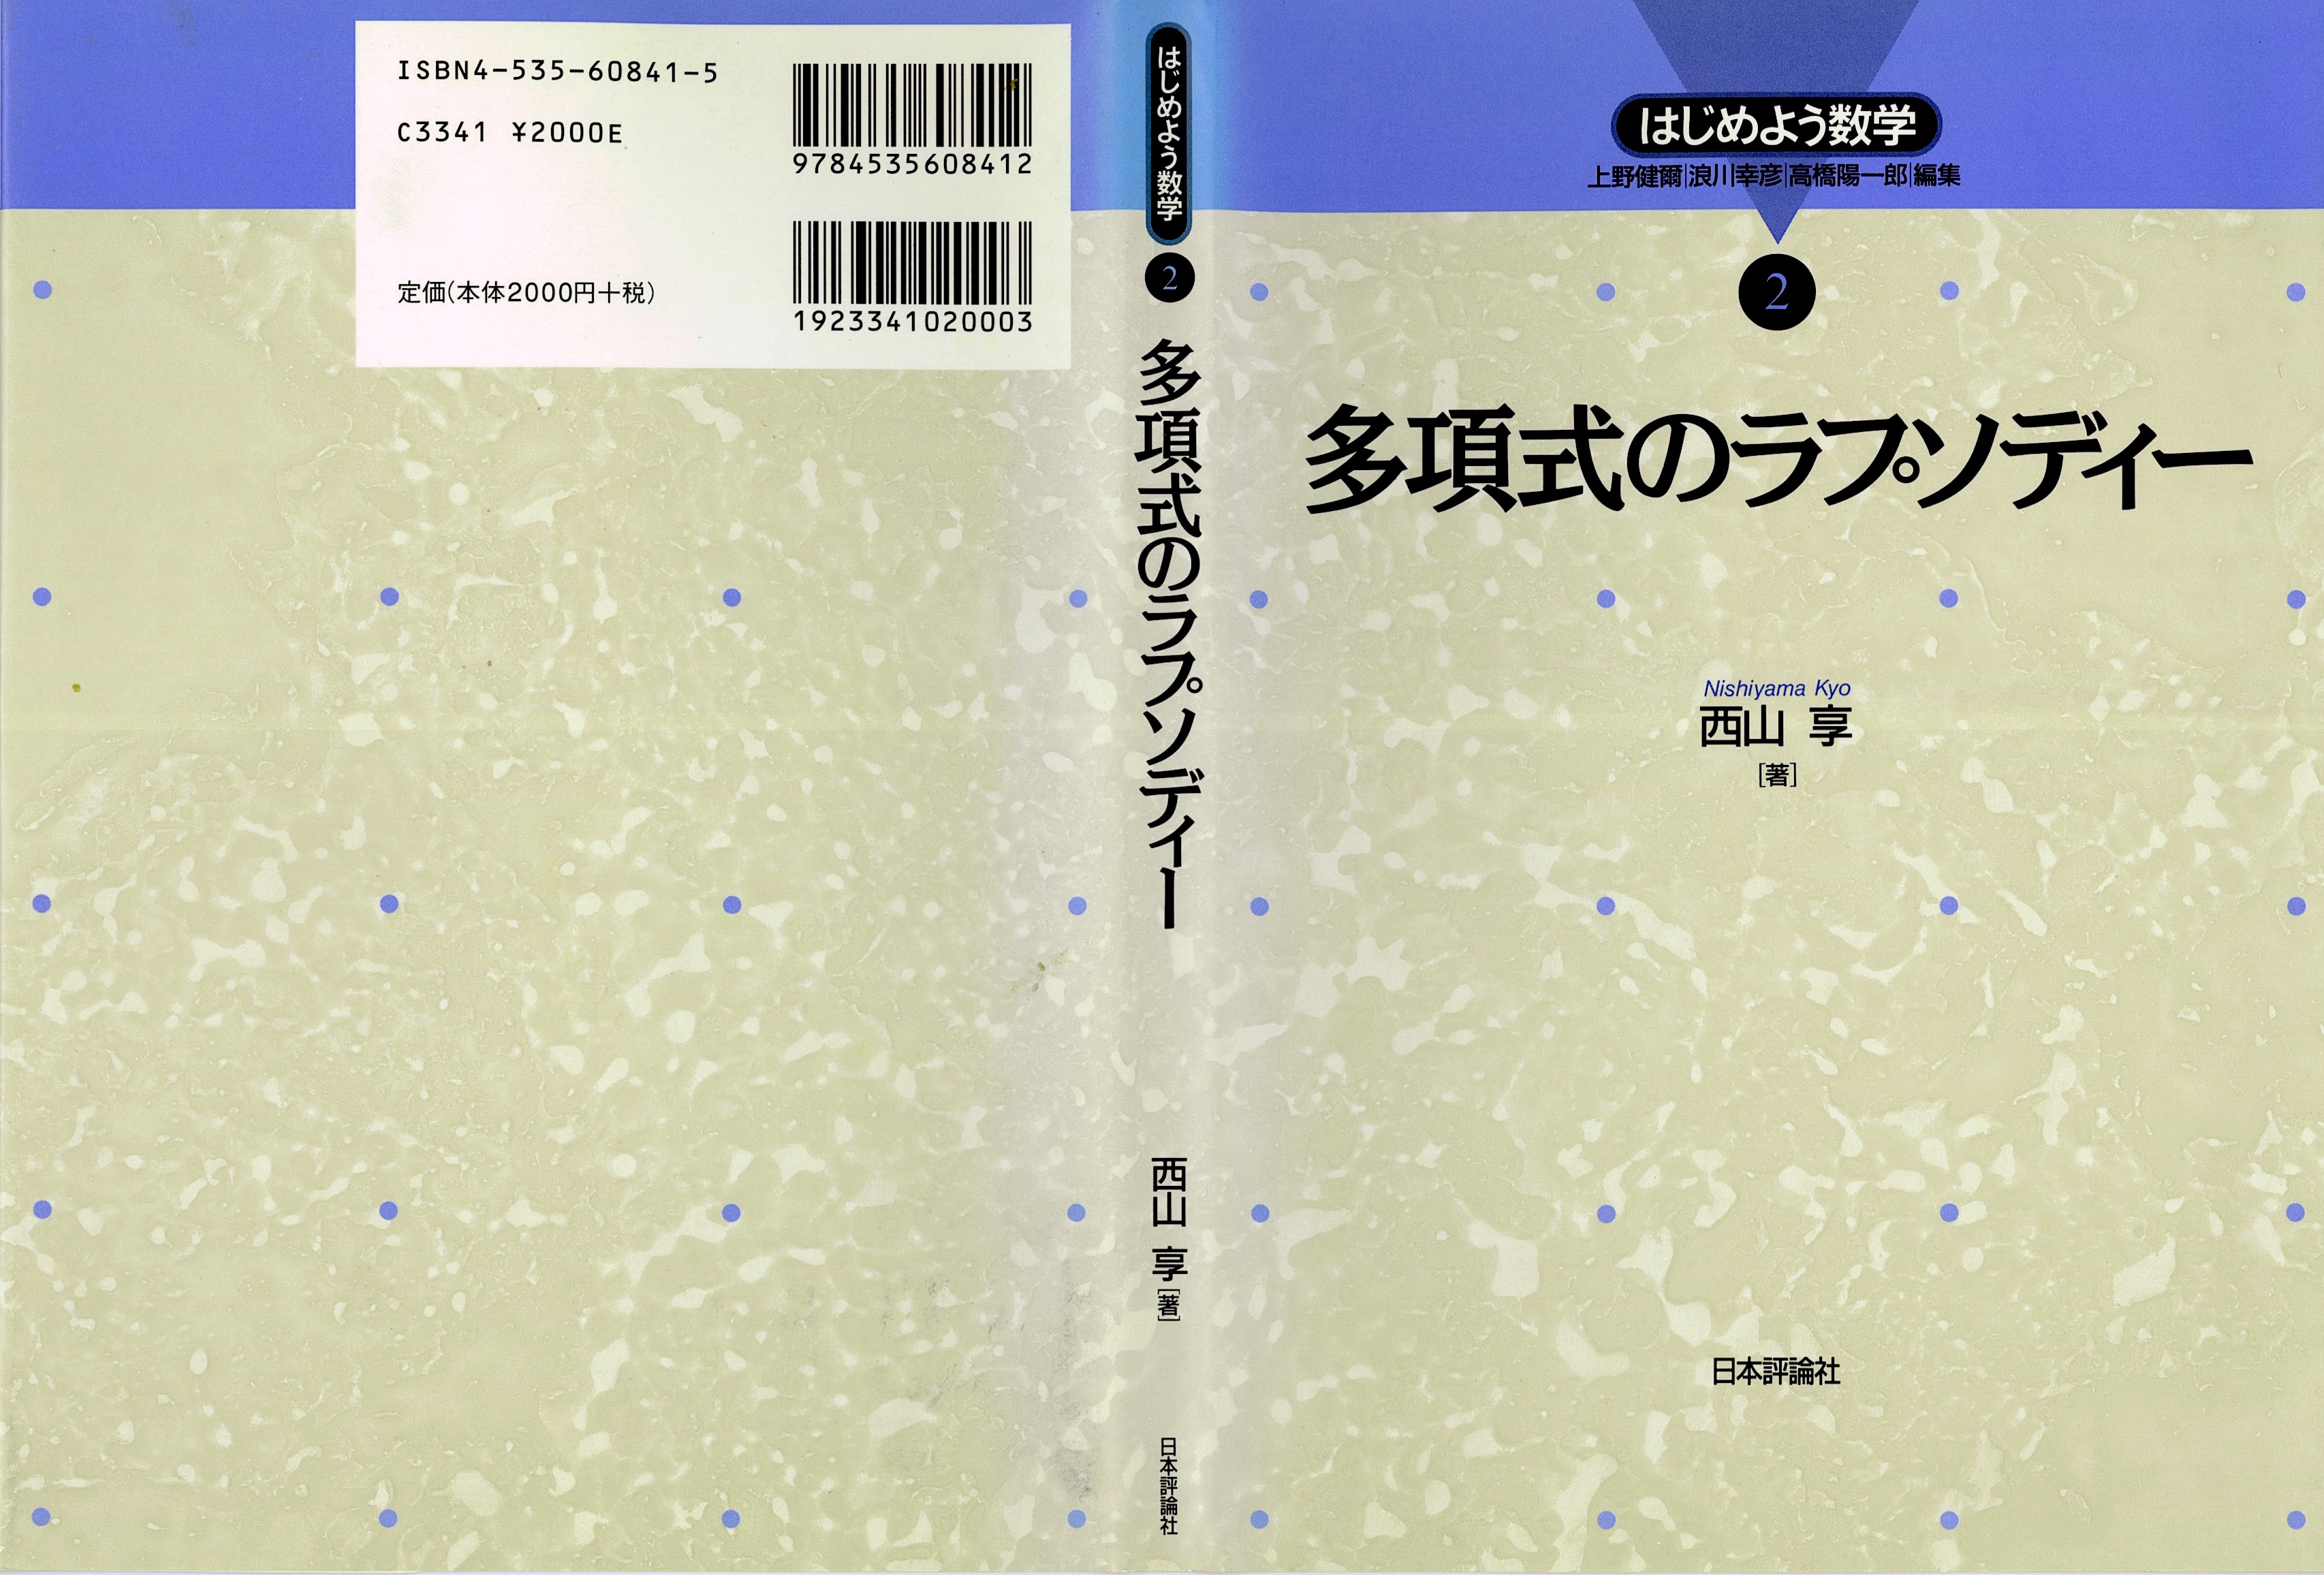 【book_cover_image】